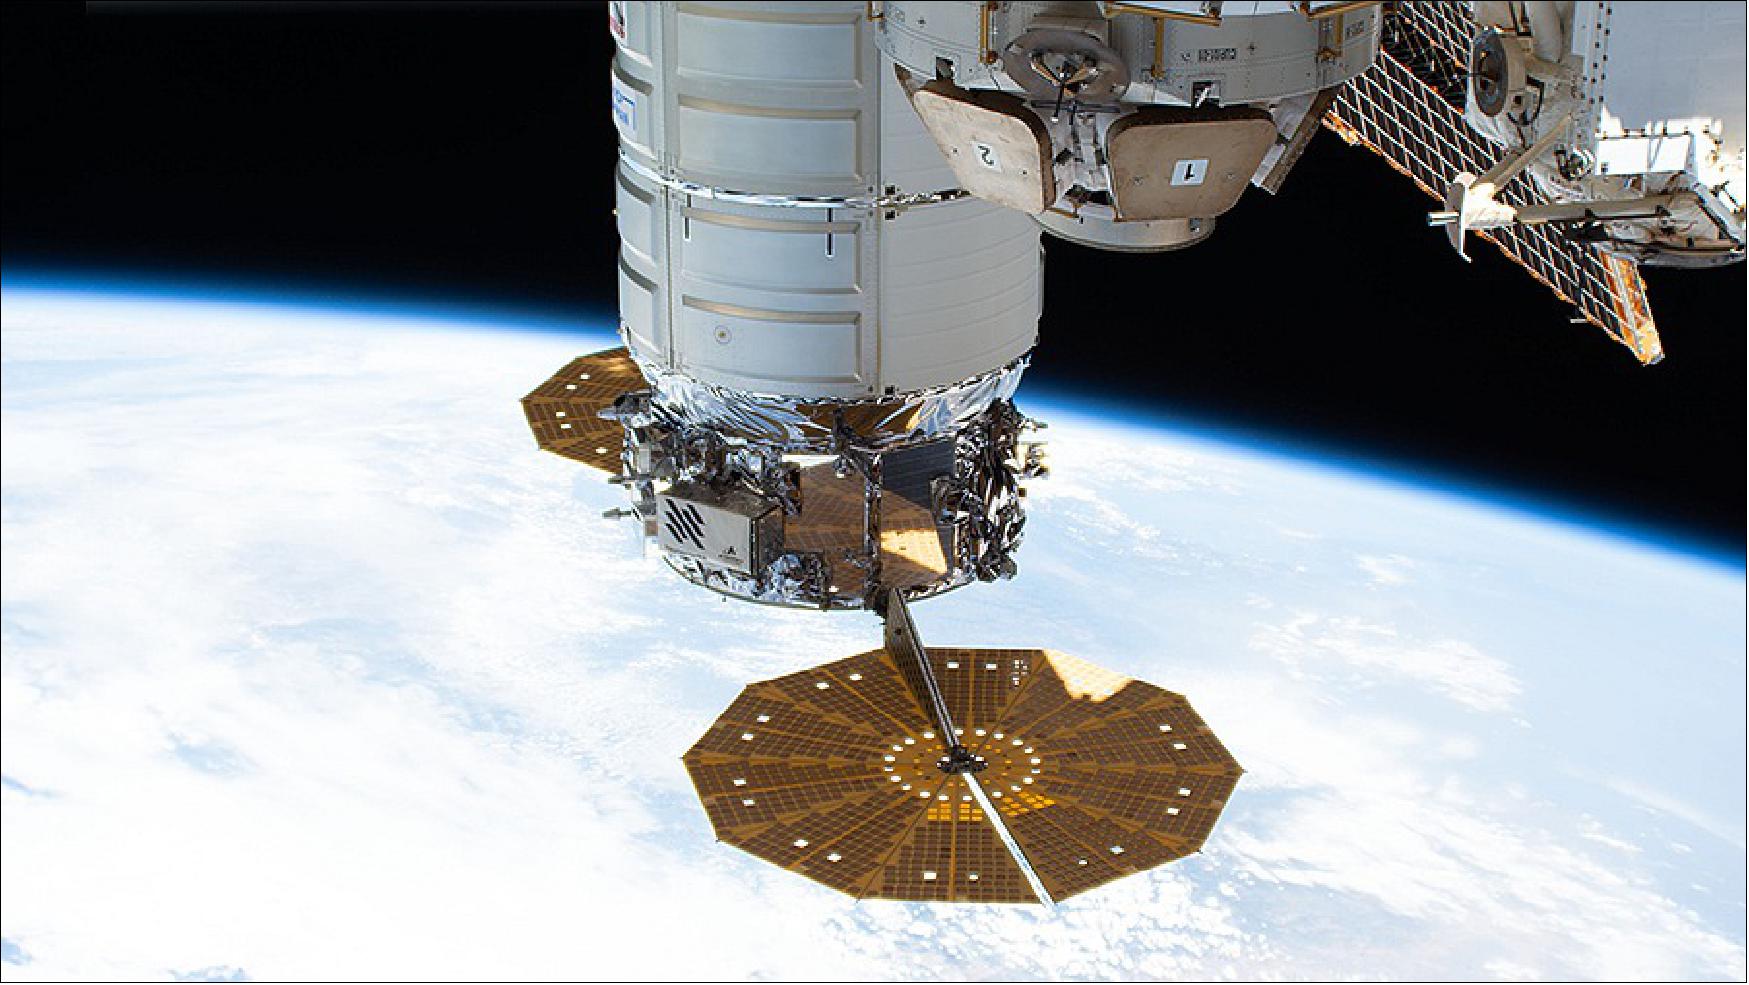 Figure 11: The Cygnus space freighter from Northrop Grumman, with its prominent cymbal-shaped solar arrays, is pictured attached to the space station (image credit: NASA TV)